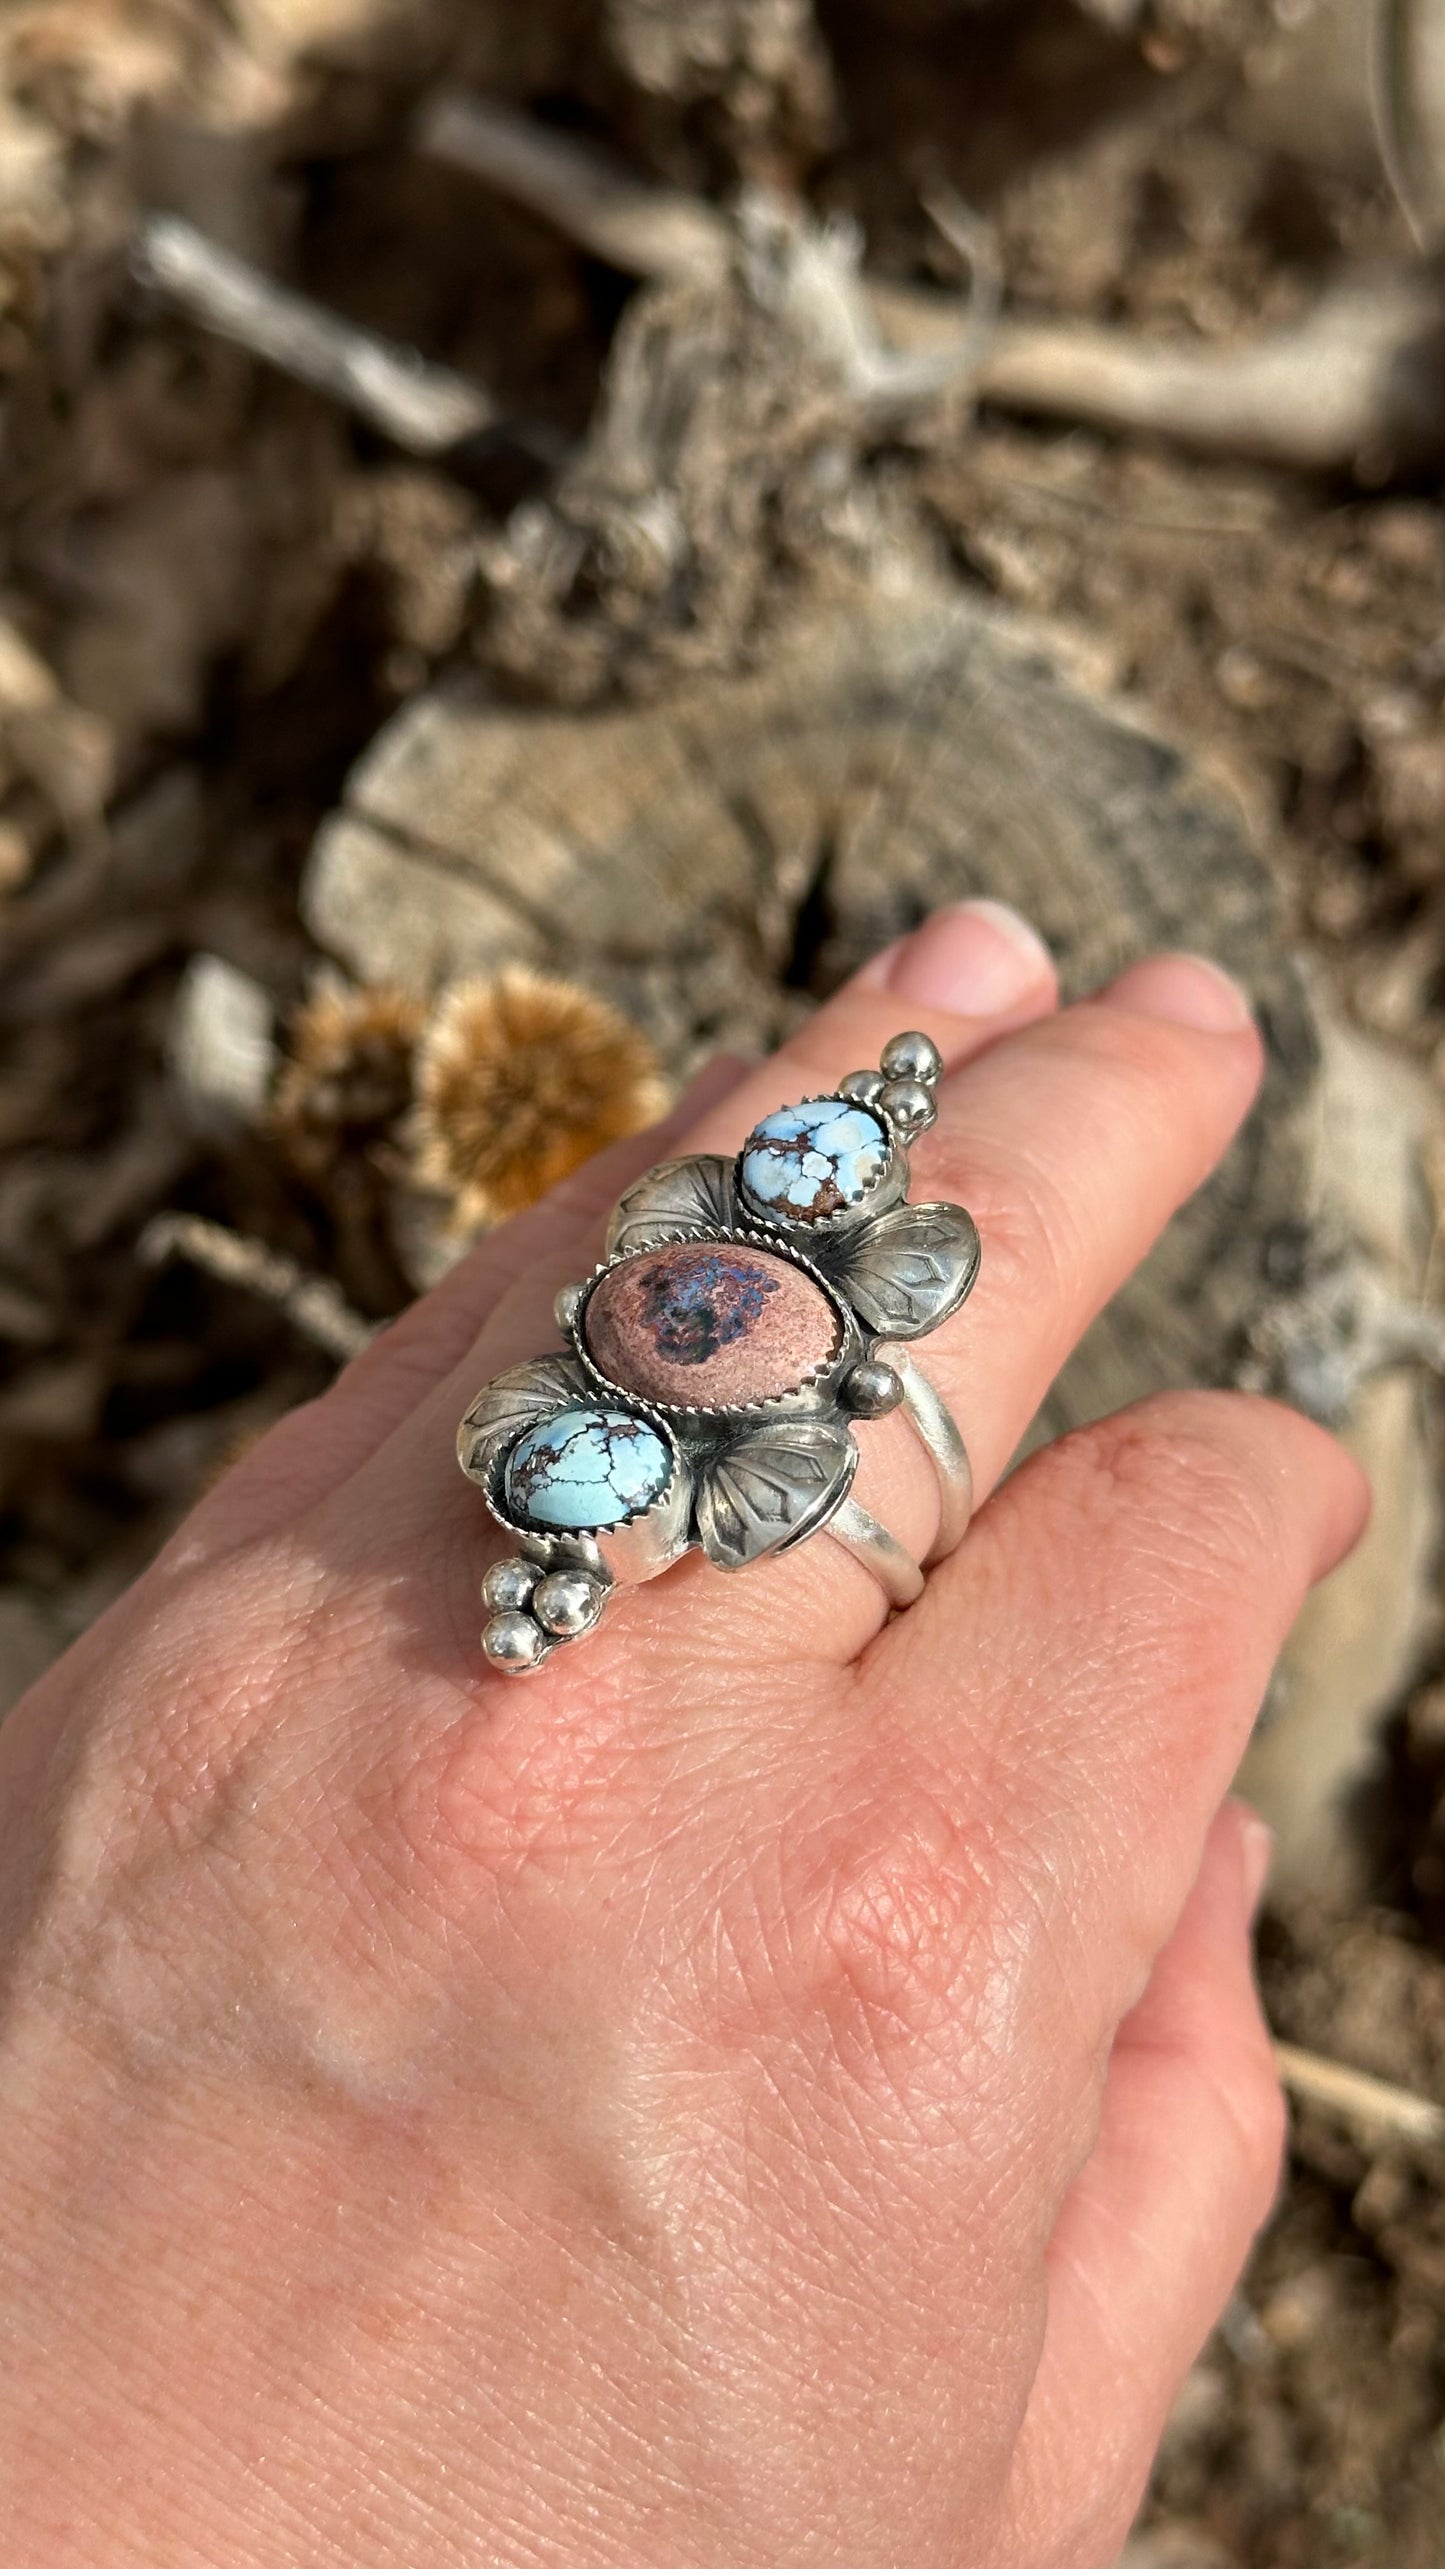 Superbloom Ring #2 - Golden Hills & Fire Opal (Finish in Your Size)